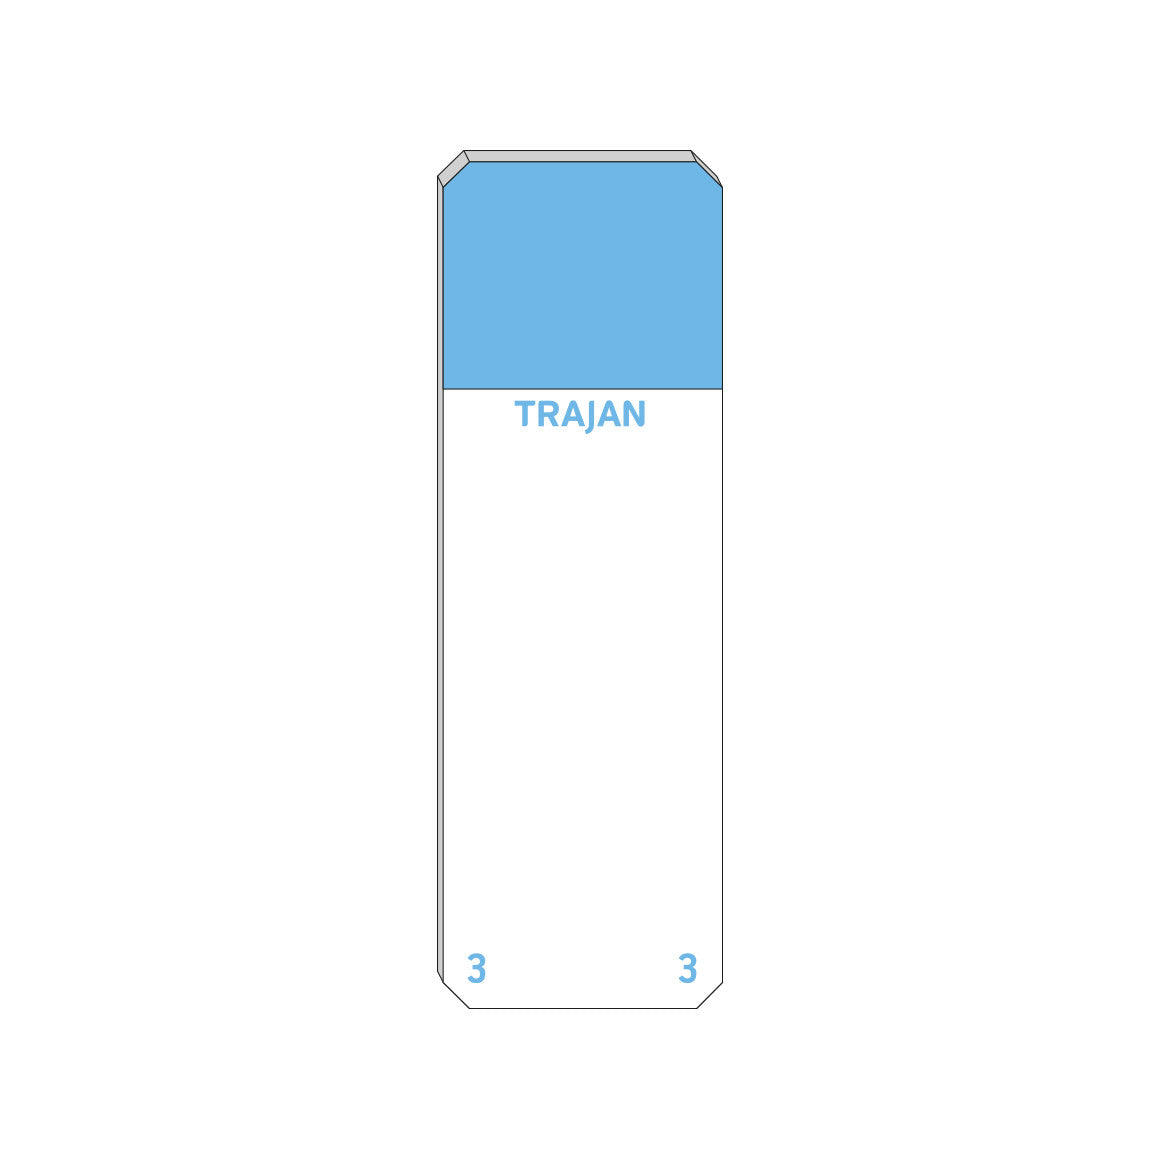 Trajan Scientific and Medical, Series 3 Adhesive Microscope Slides, Blue, Frost 20 mm, 75 mm x 25 mm